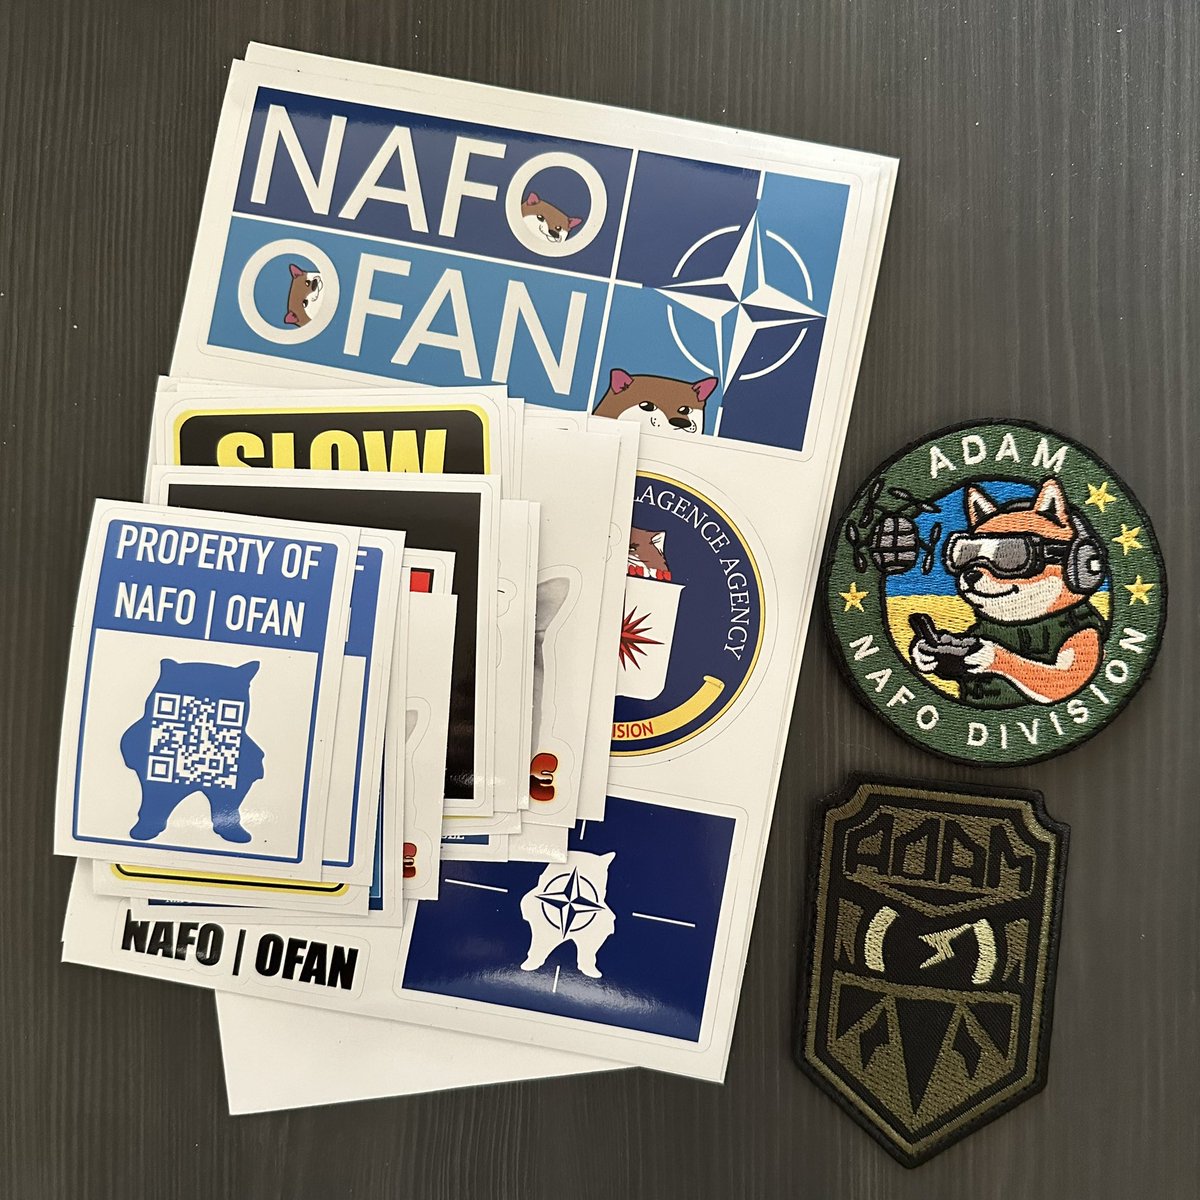 It’s patch day again! And got some new propaganda material from HQ… @Official_NAFO @TeamAdamTG